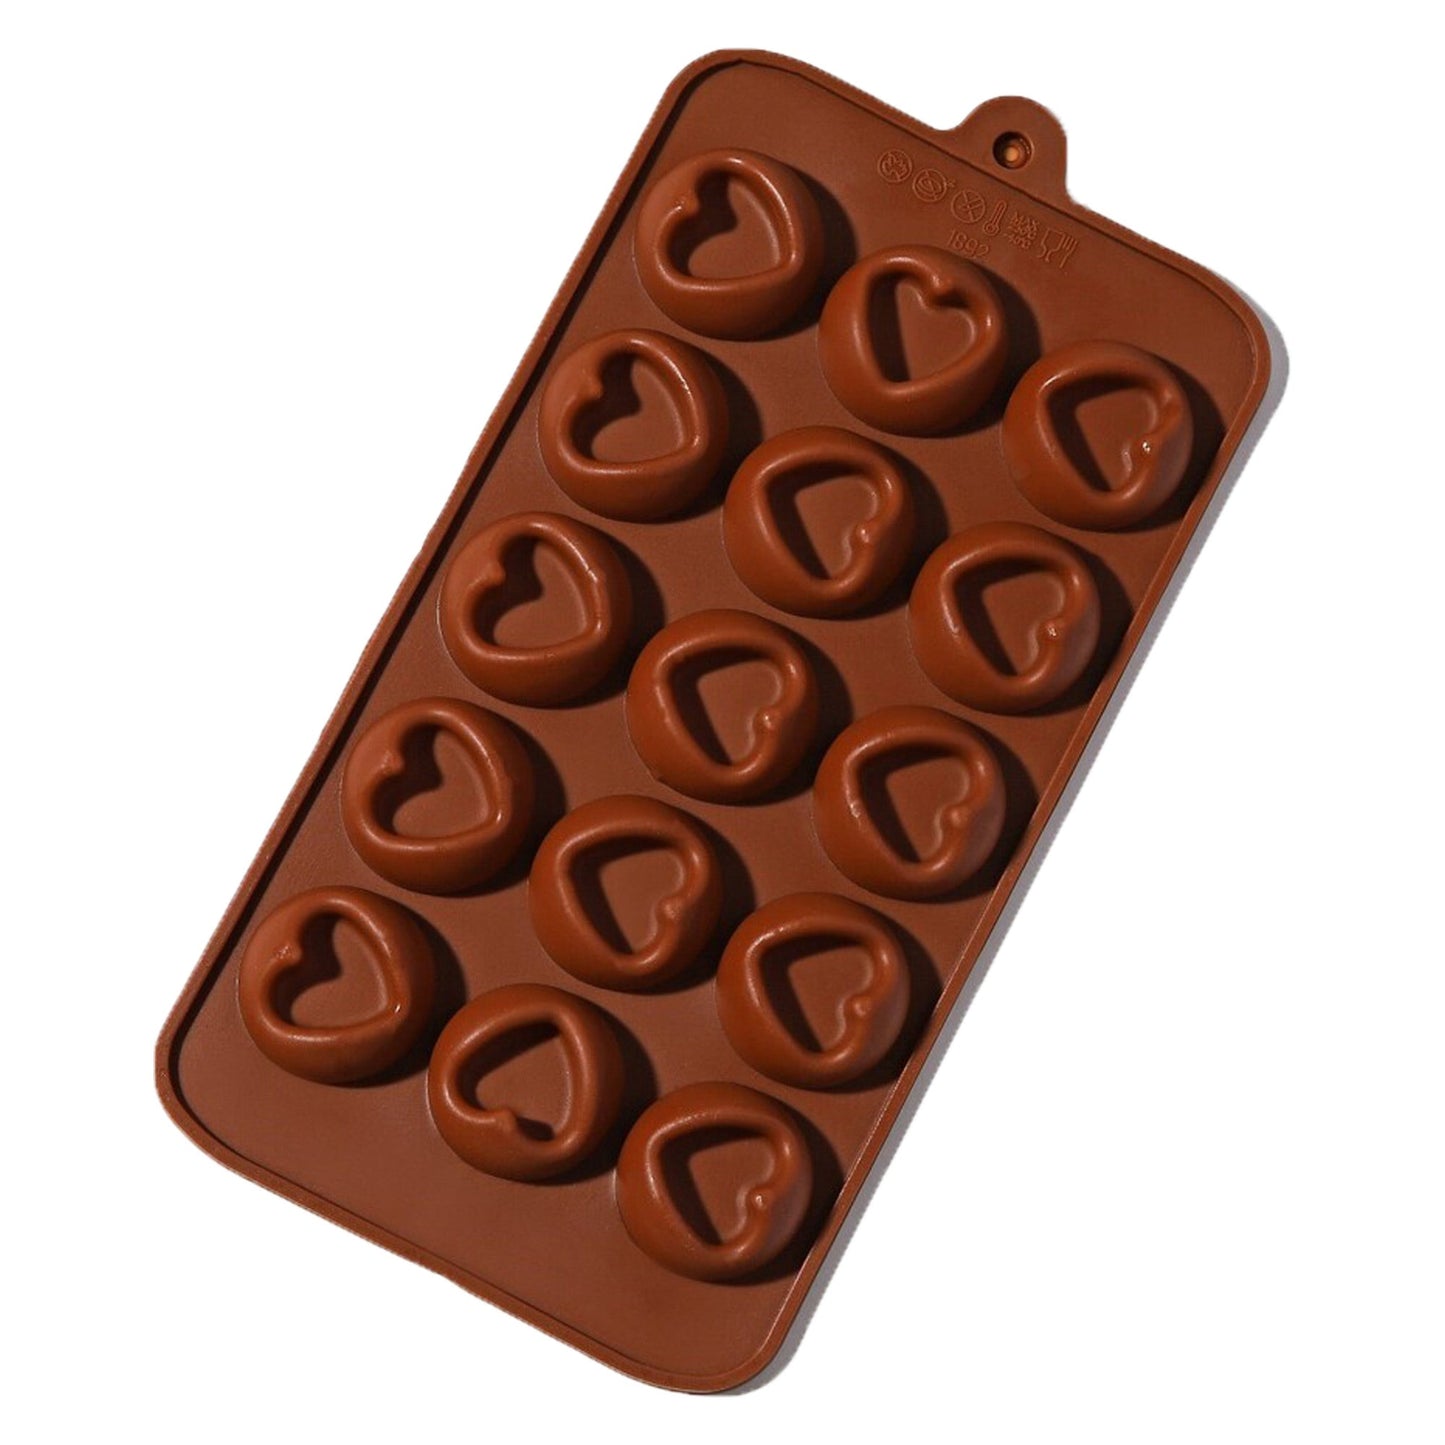 Hearts in Circles Design Silicone Chocolate Mold 15 Cavity